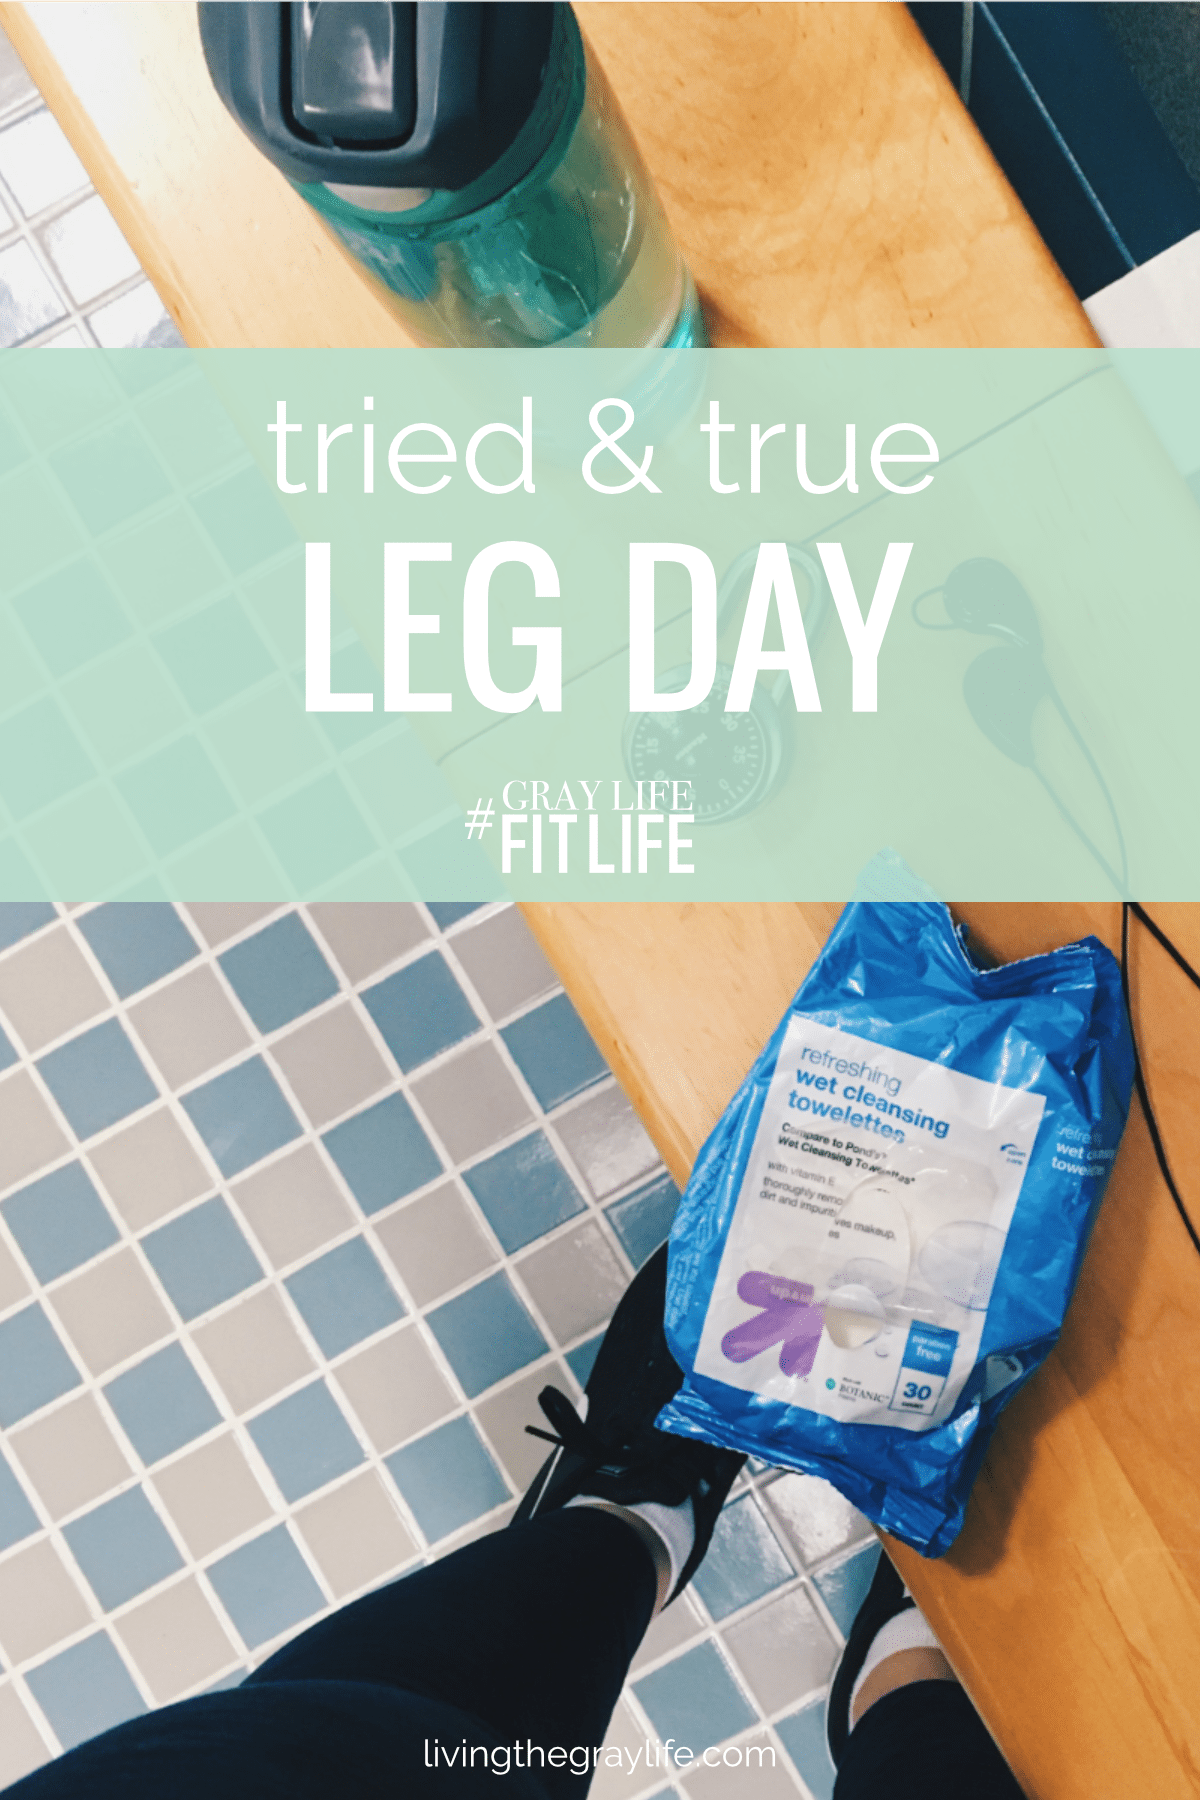 Looking for a leg workout to really get you sore and get those gains? Look no further! Check out my tried and true leg workout!